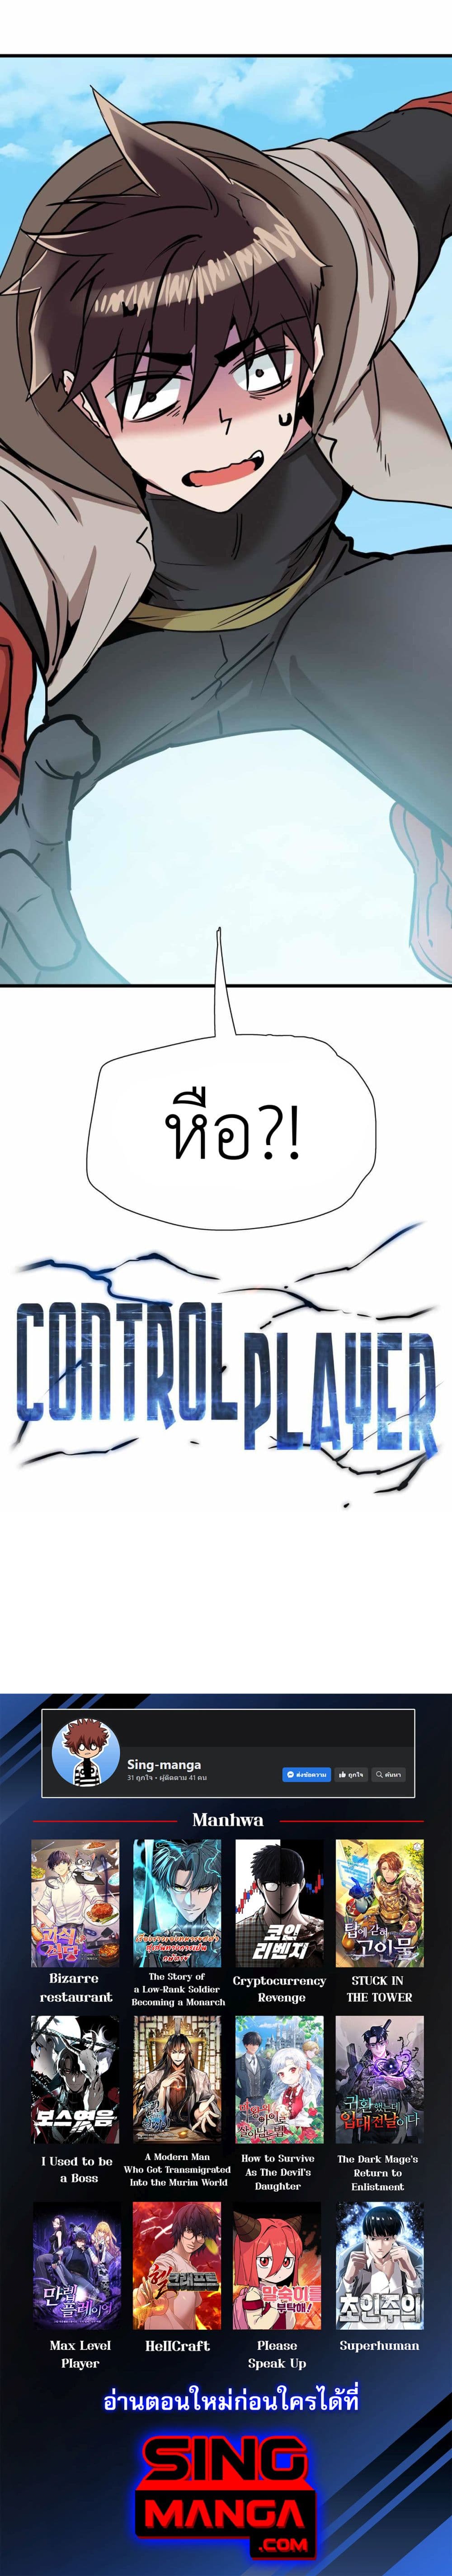 Control Player 19-19